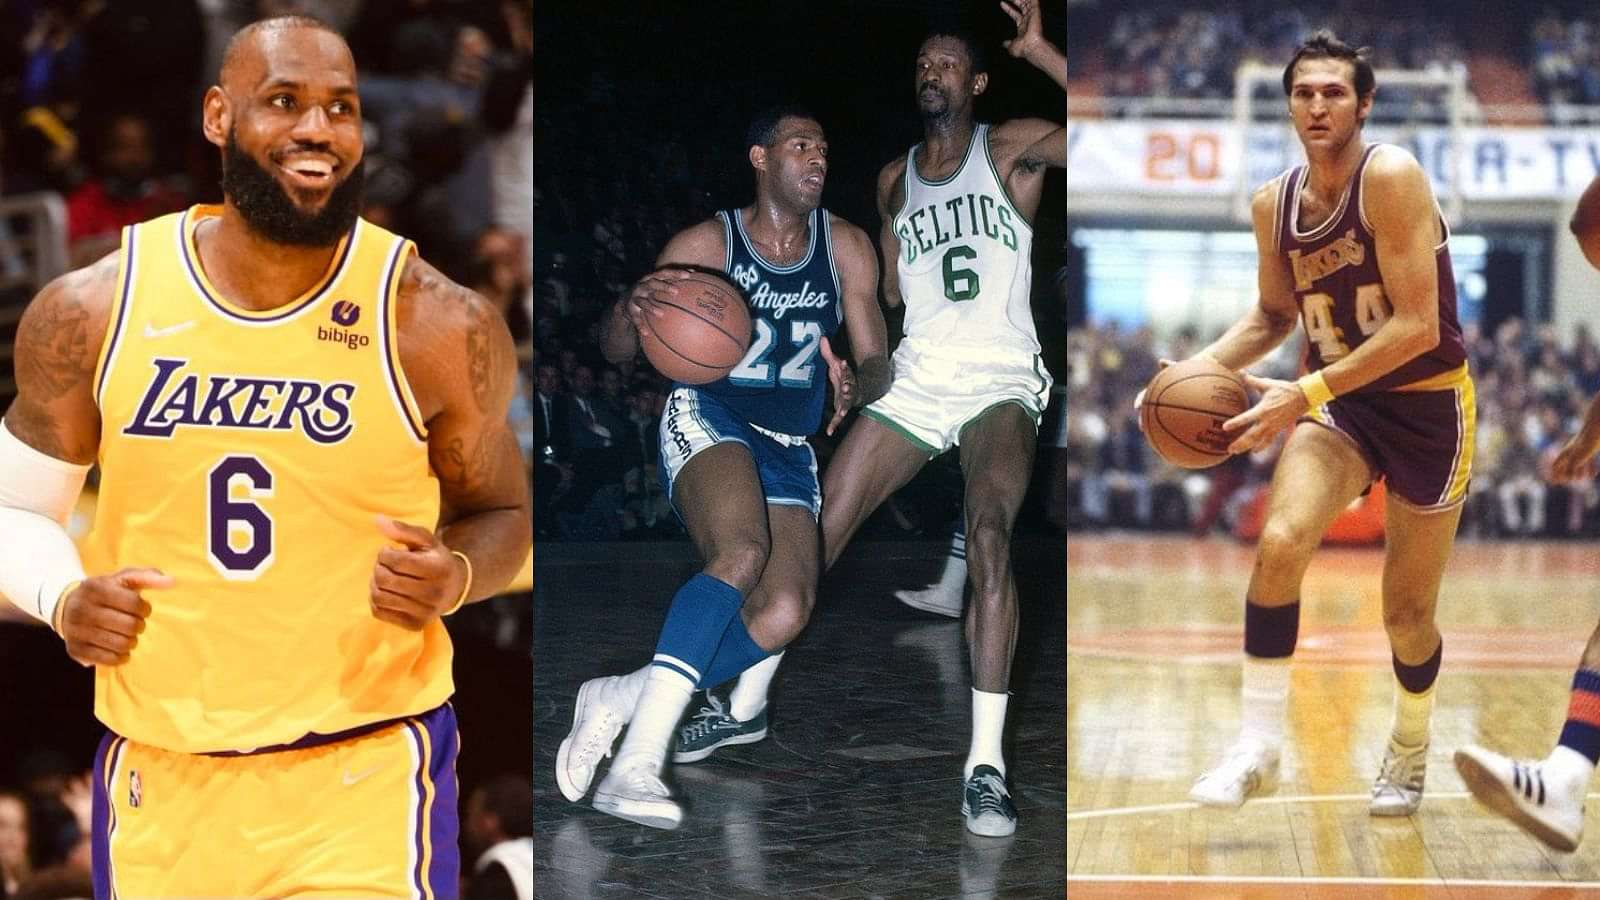 Elgin Baylor: Los Angeles Lakers icon and 11-time NBA All-Star